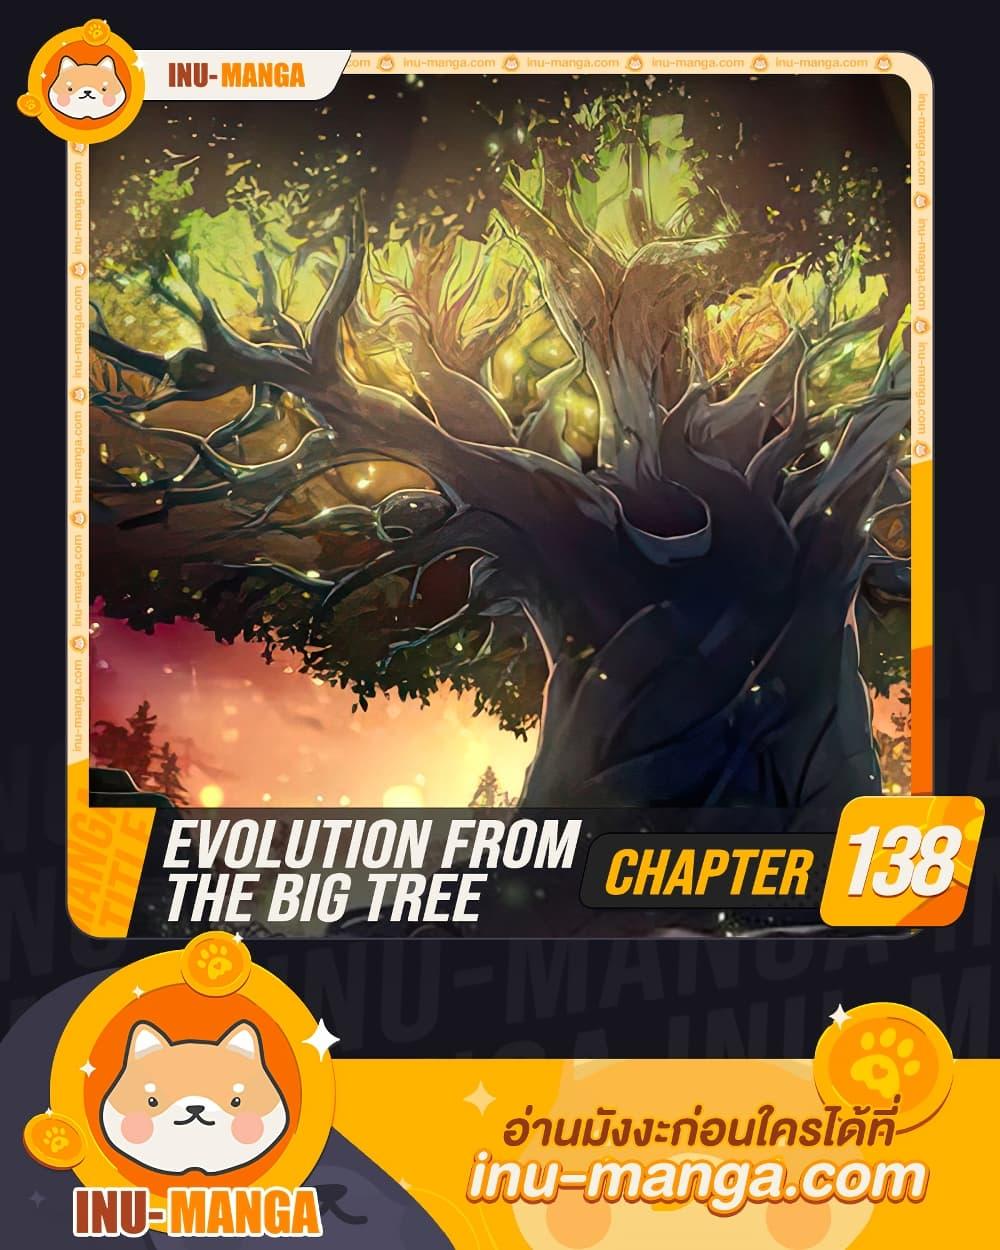 Evolution from the Big Tree 138 01